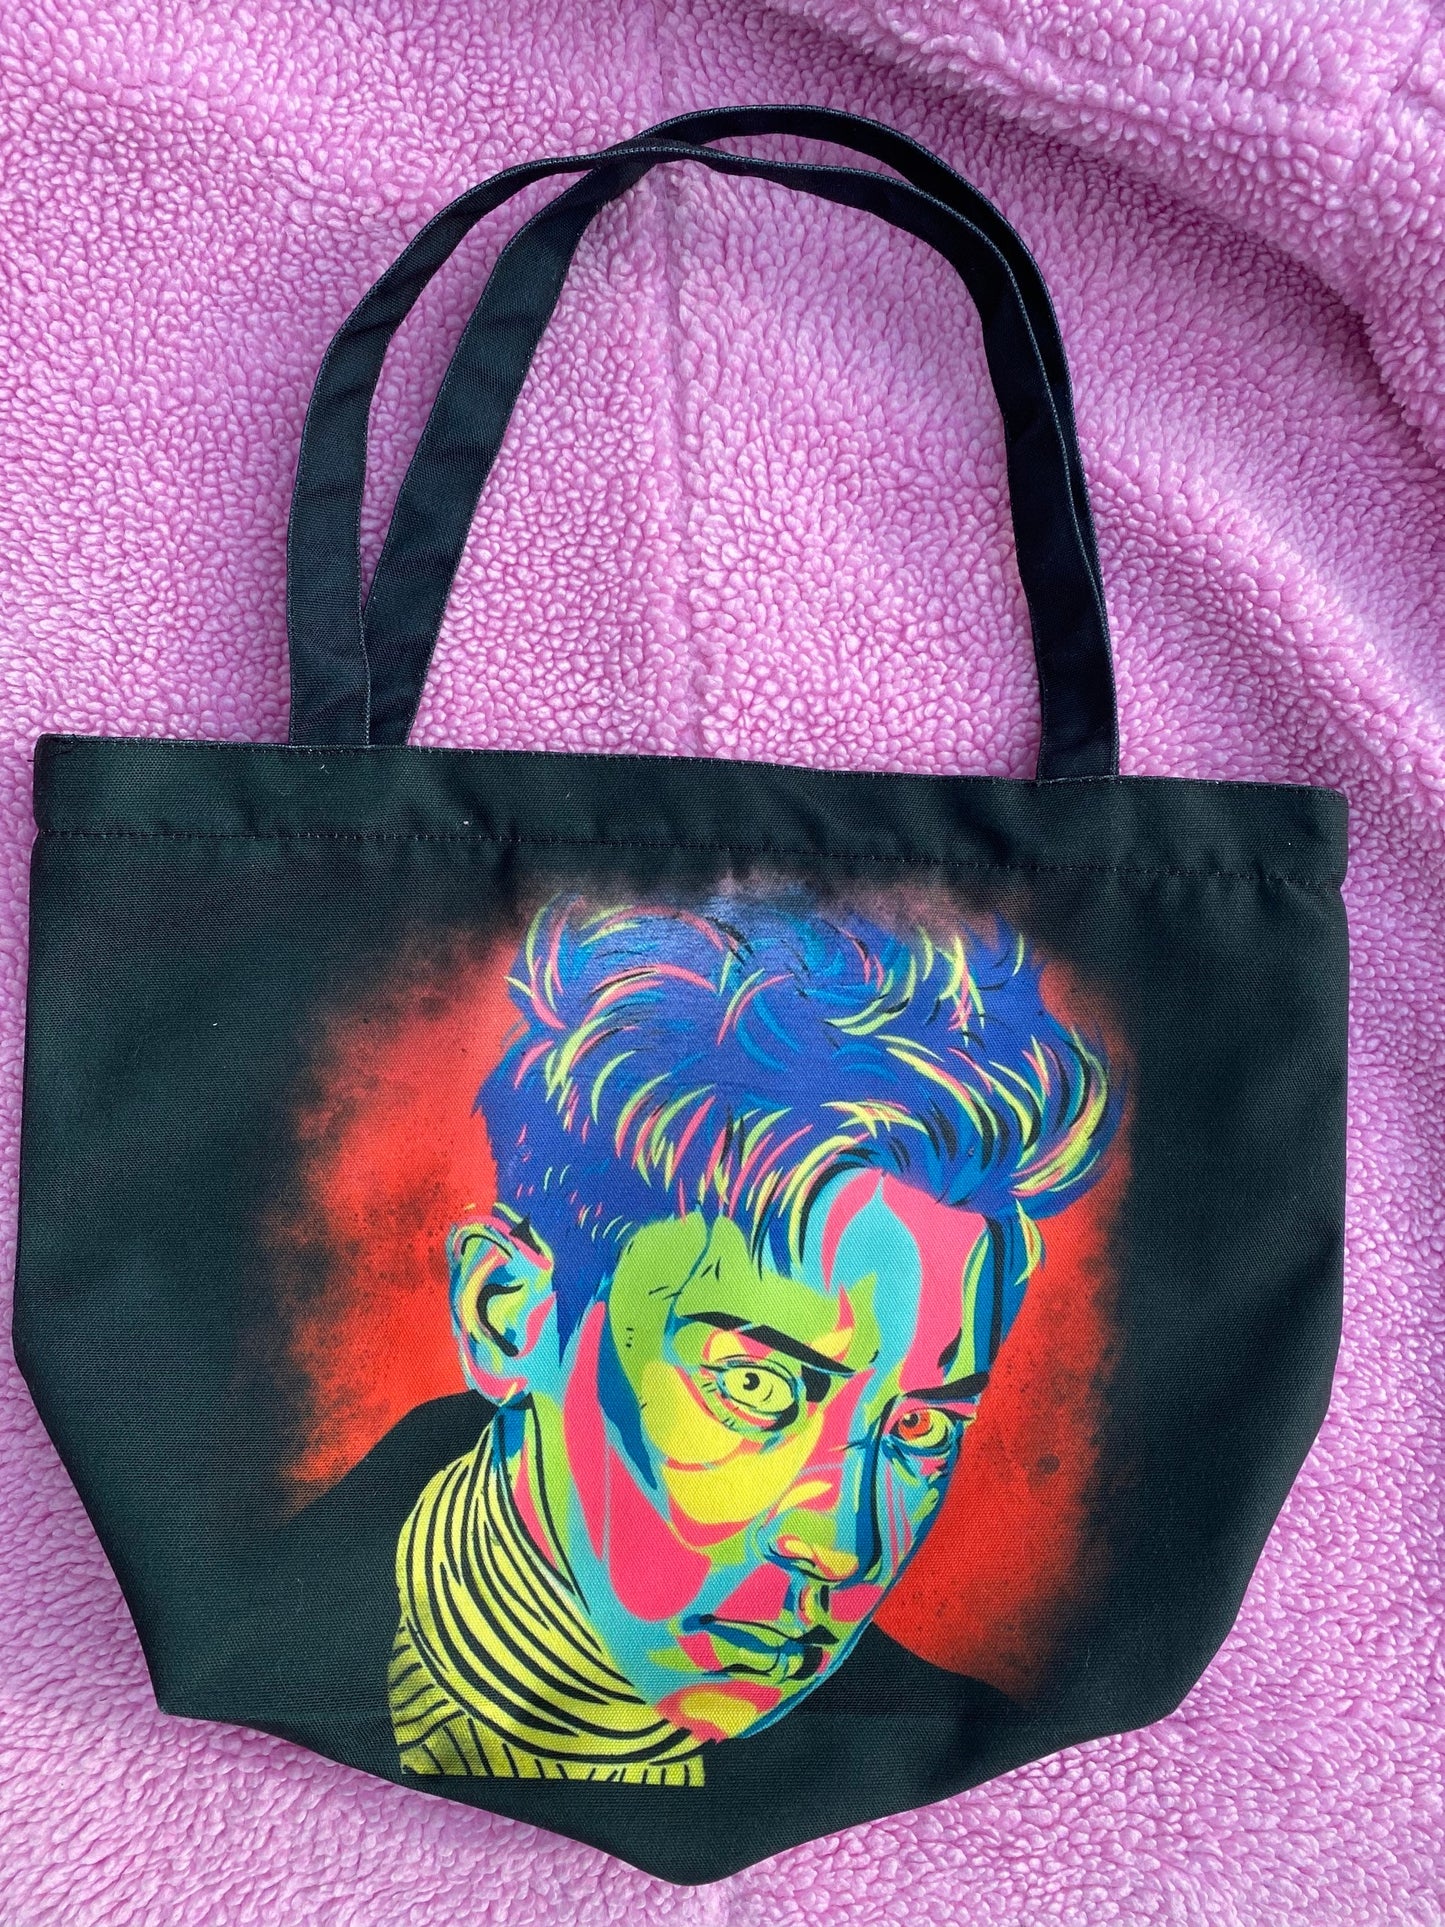 X-EXO Chanyeol Obsession Inspired Tote Bag